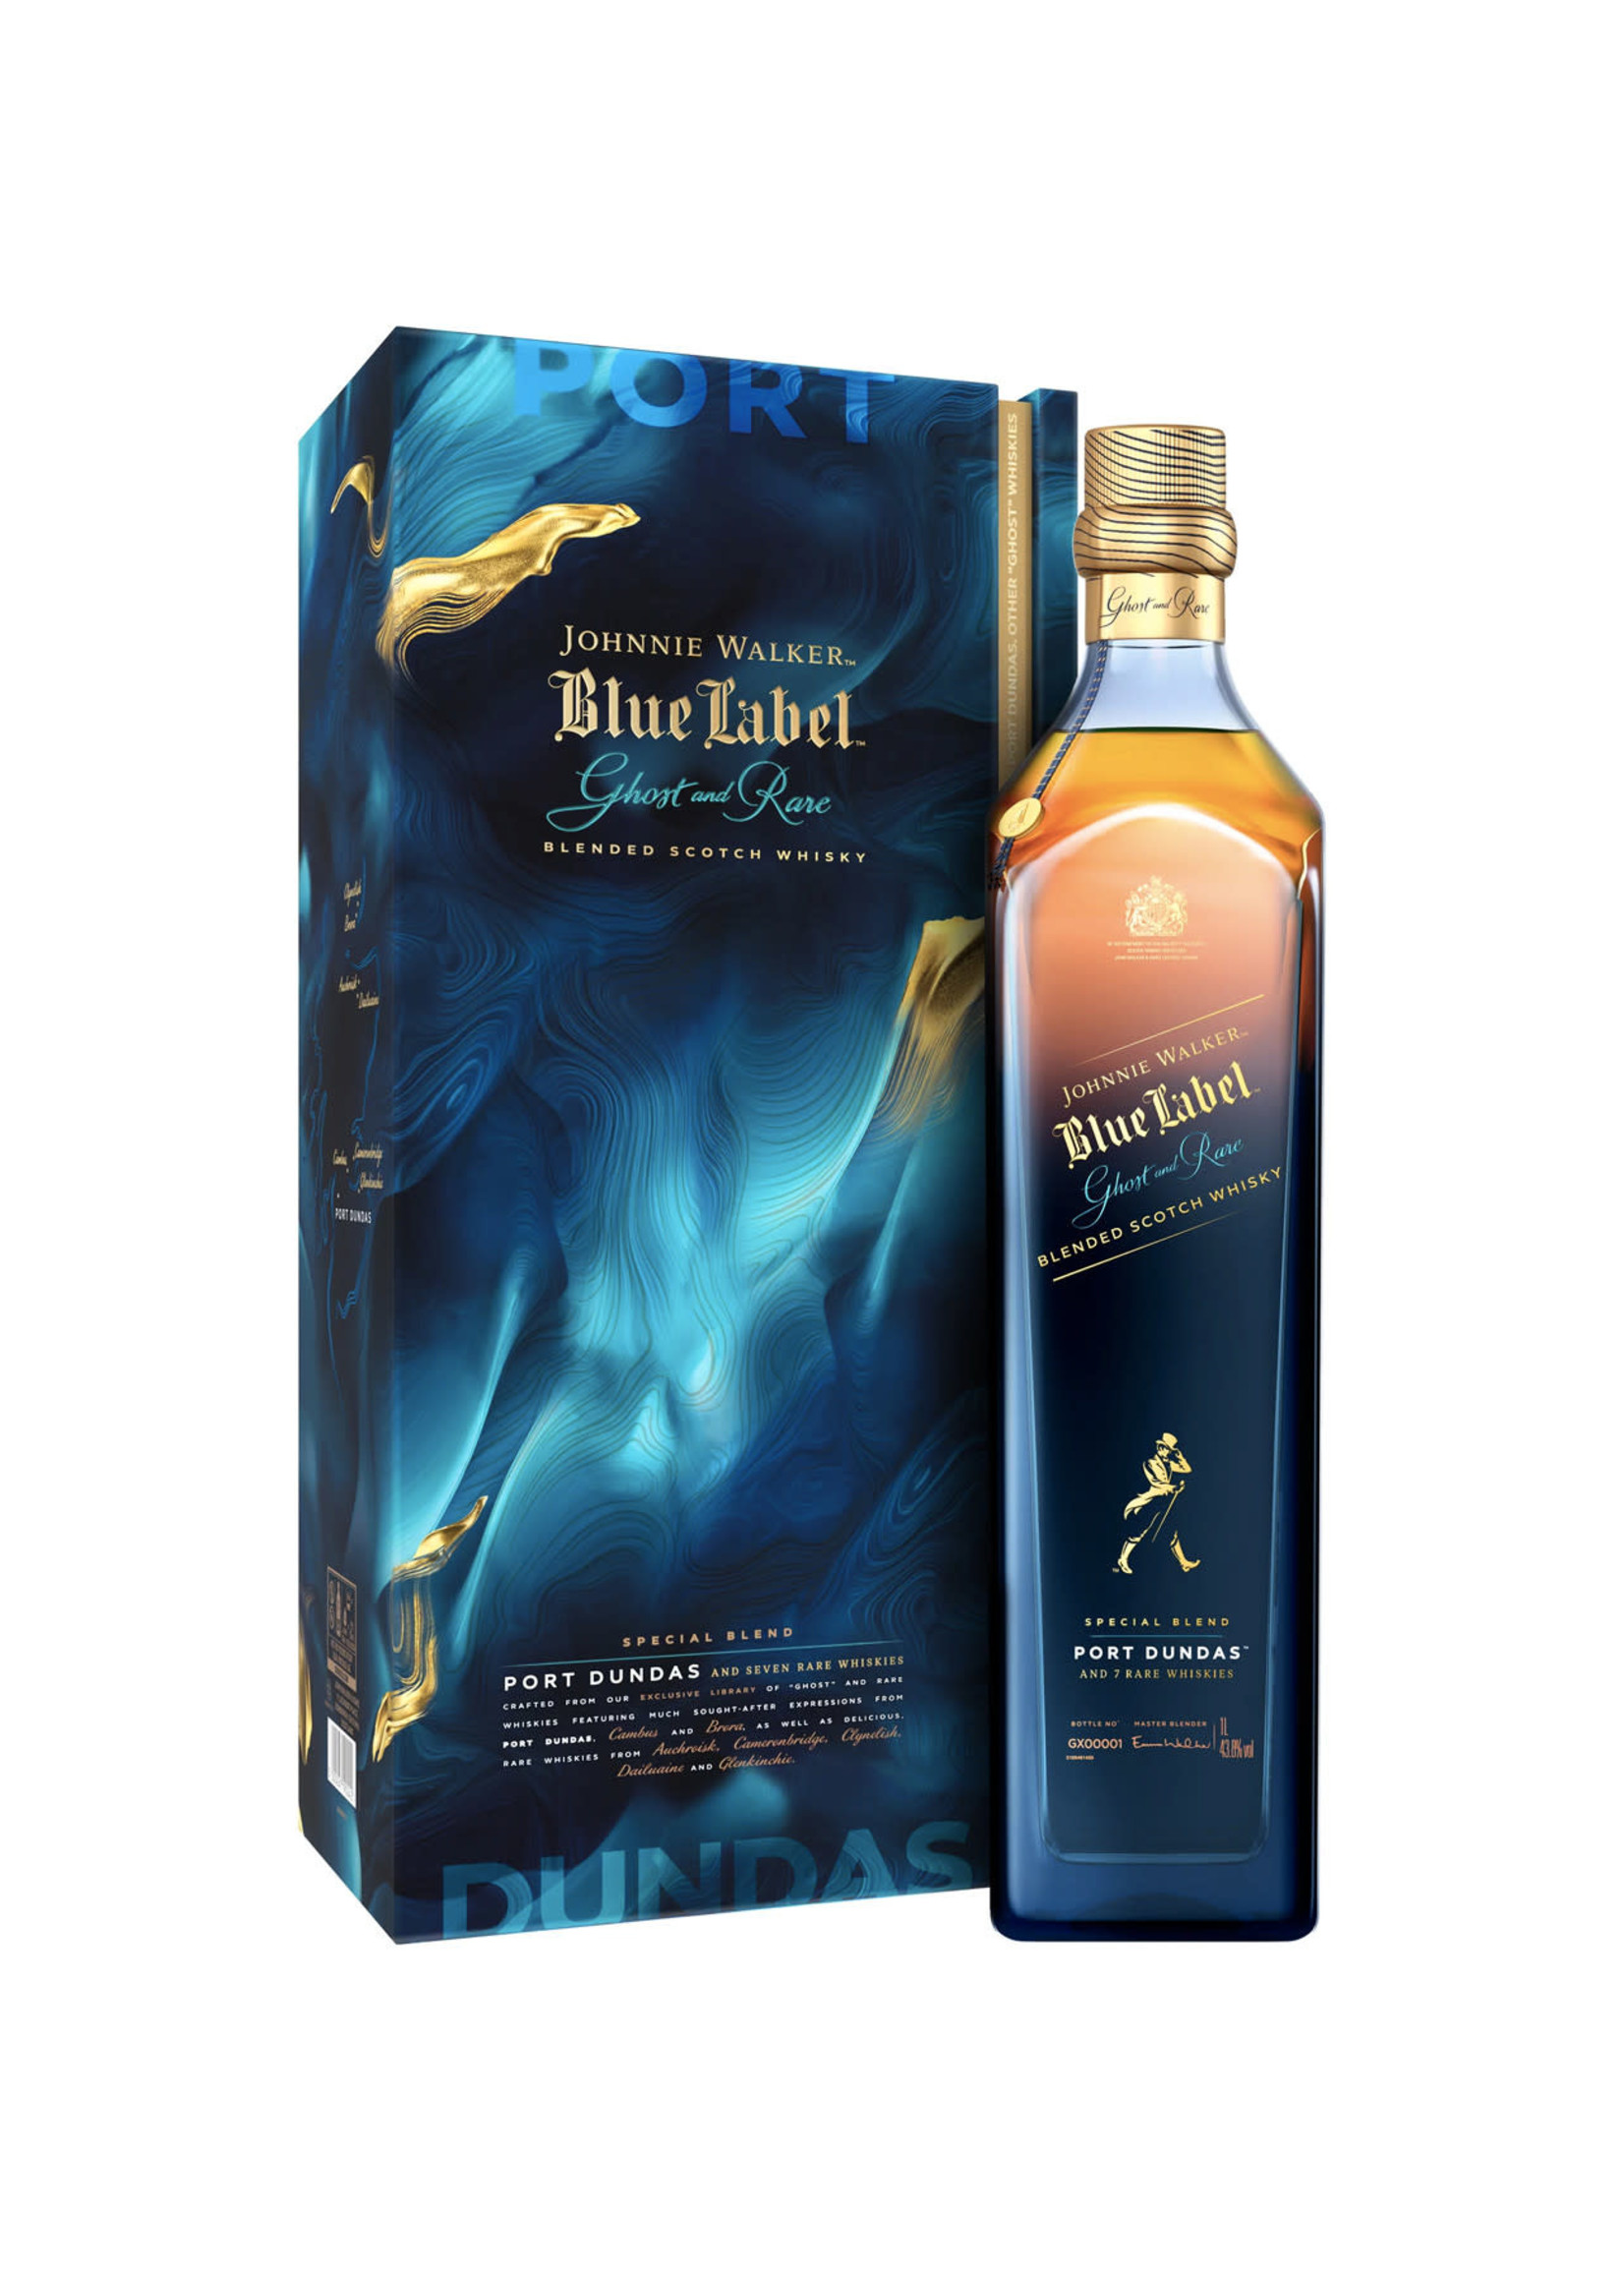 Johnnie Walker Blended Scotch Blue Label Ghost And Rare Special Blend With Port Dundas 87.6Proof 750ml